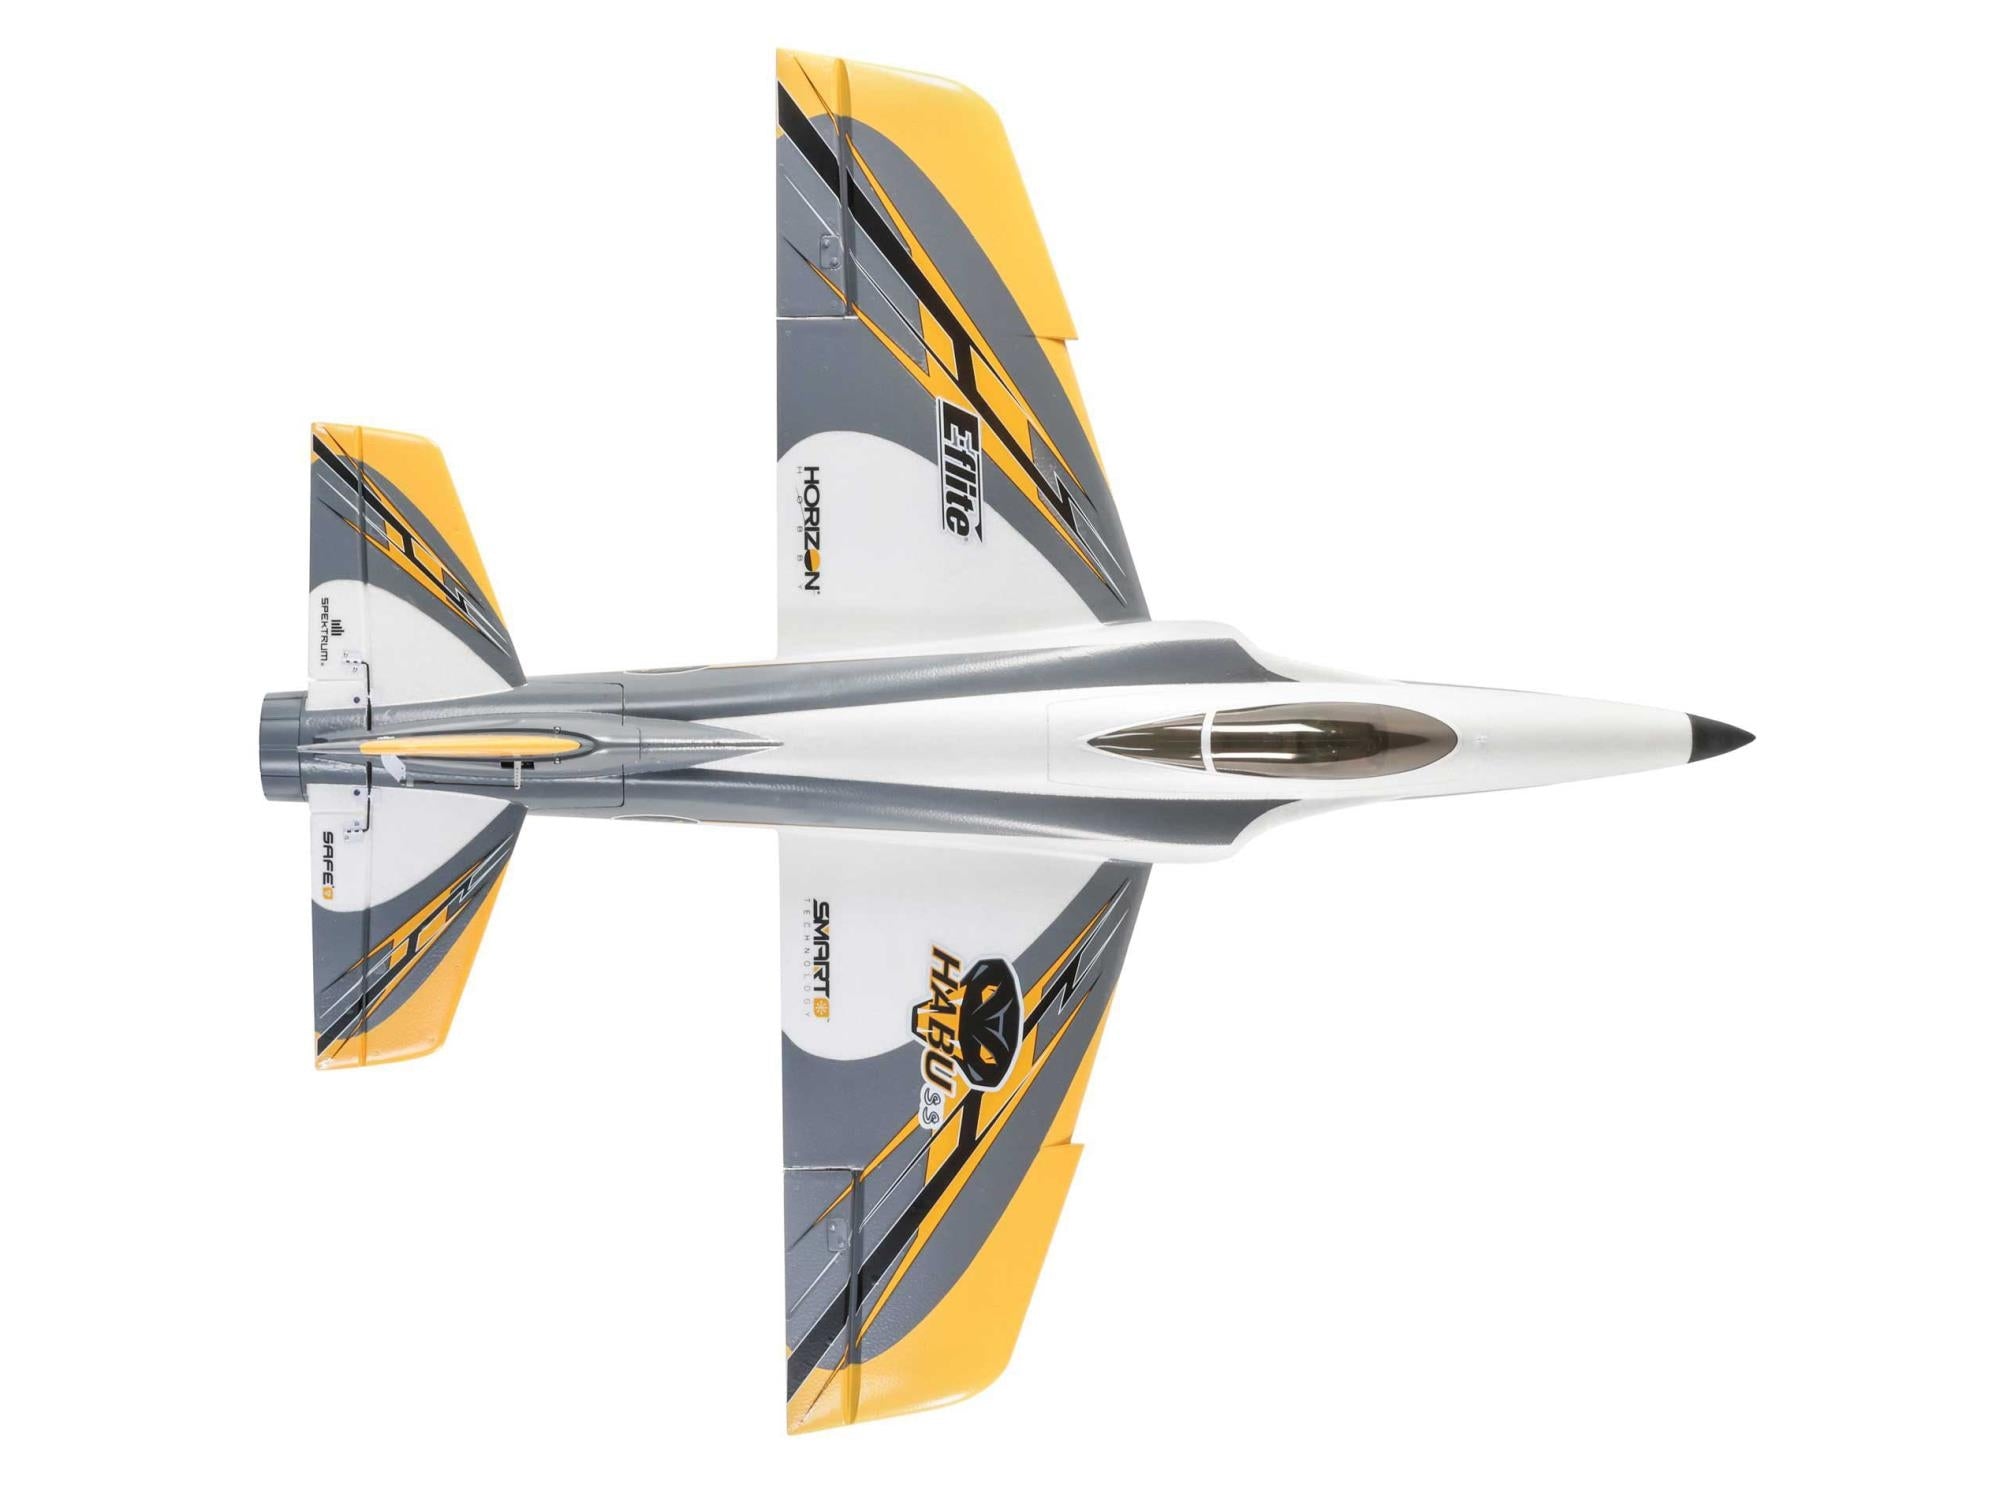 E-Flite Habu SS (Super Sport) 70mm EDF Jet BNF Basic with SAFE Select and AS3X EFL0950